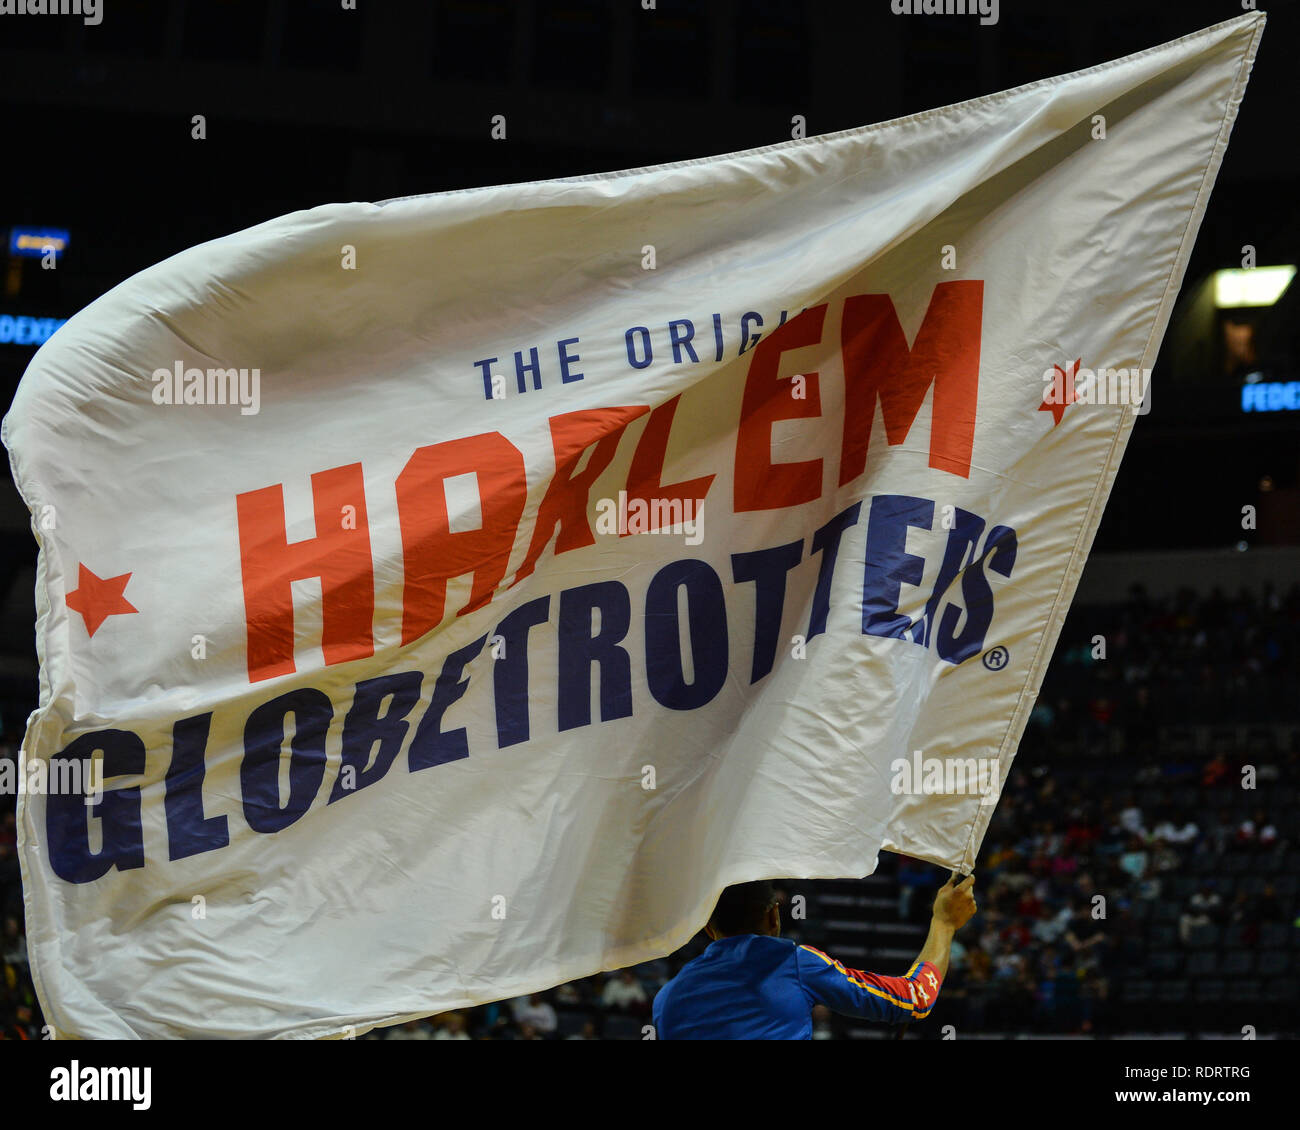 Memphis, TN, USA. 18th Jan, 2019. The Harlem Globetrotters flag flies during the exhibition game against the Washington Generals at Fed Ex Forum in Memphis, TN. Kevin Langley/Sports South Media/CSM/Alamy Live News Stock Photo